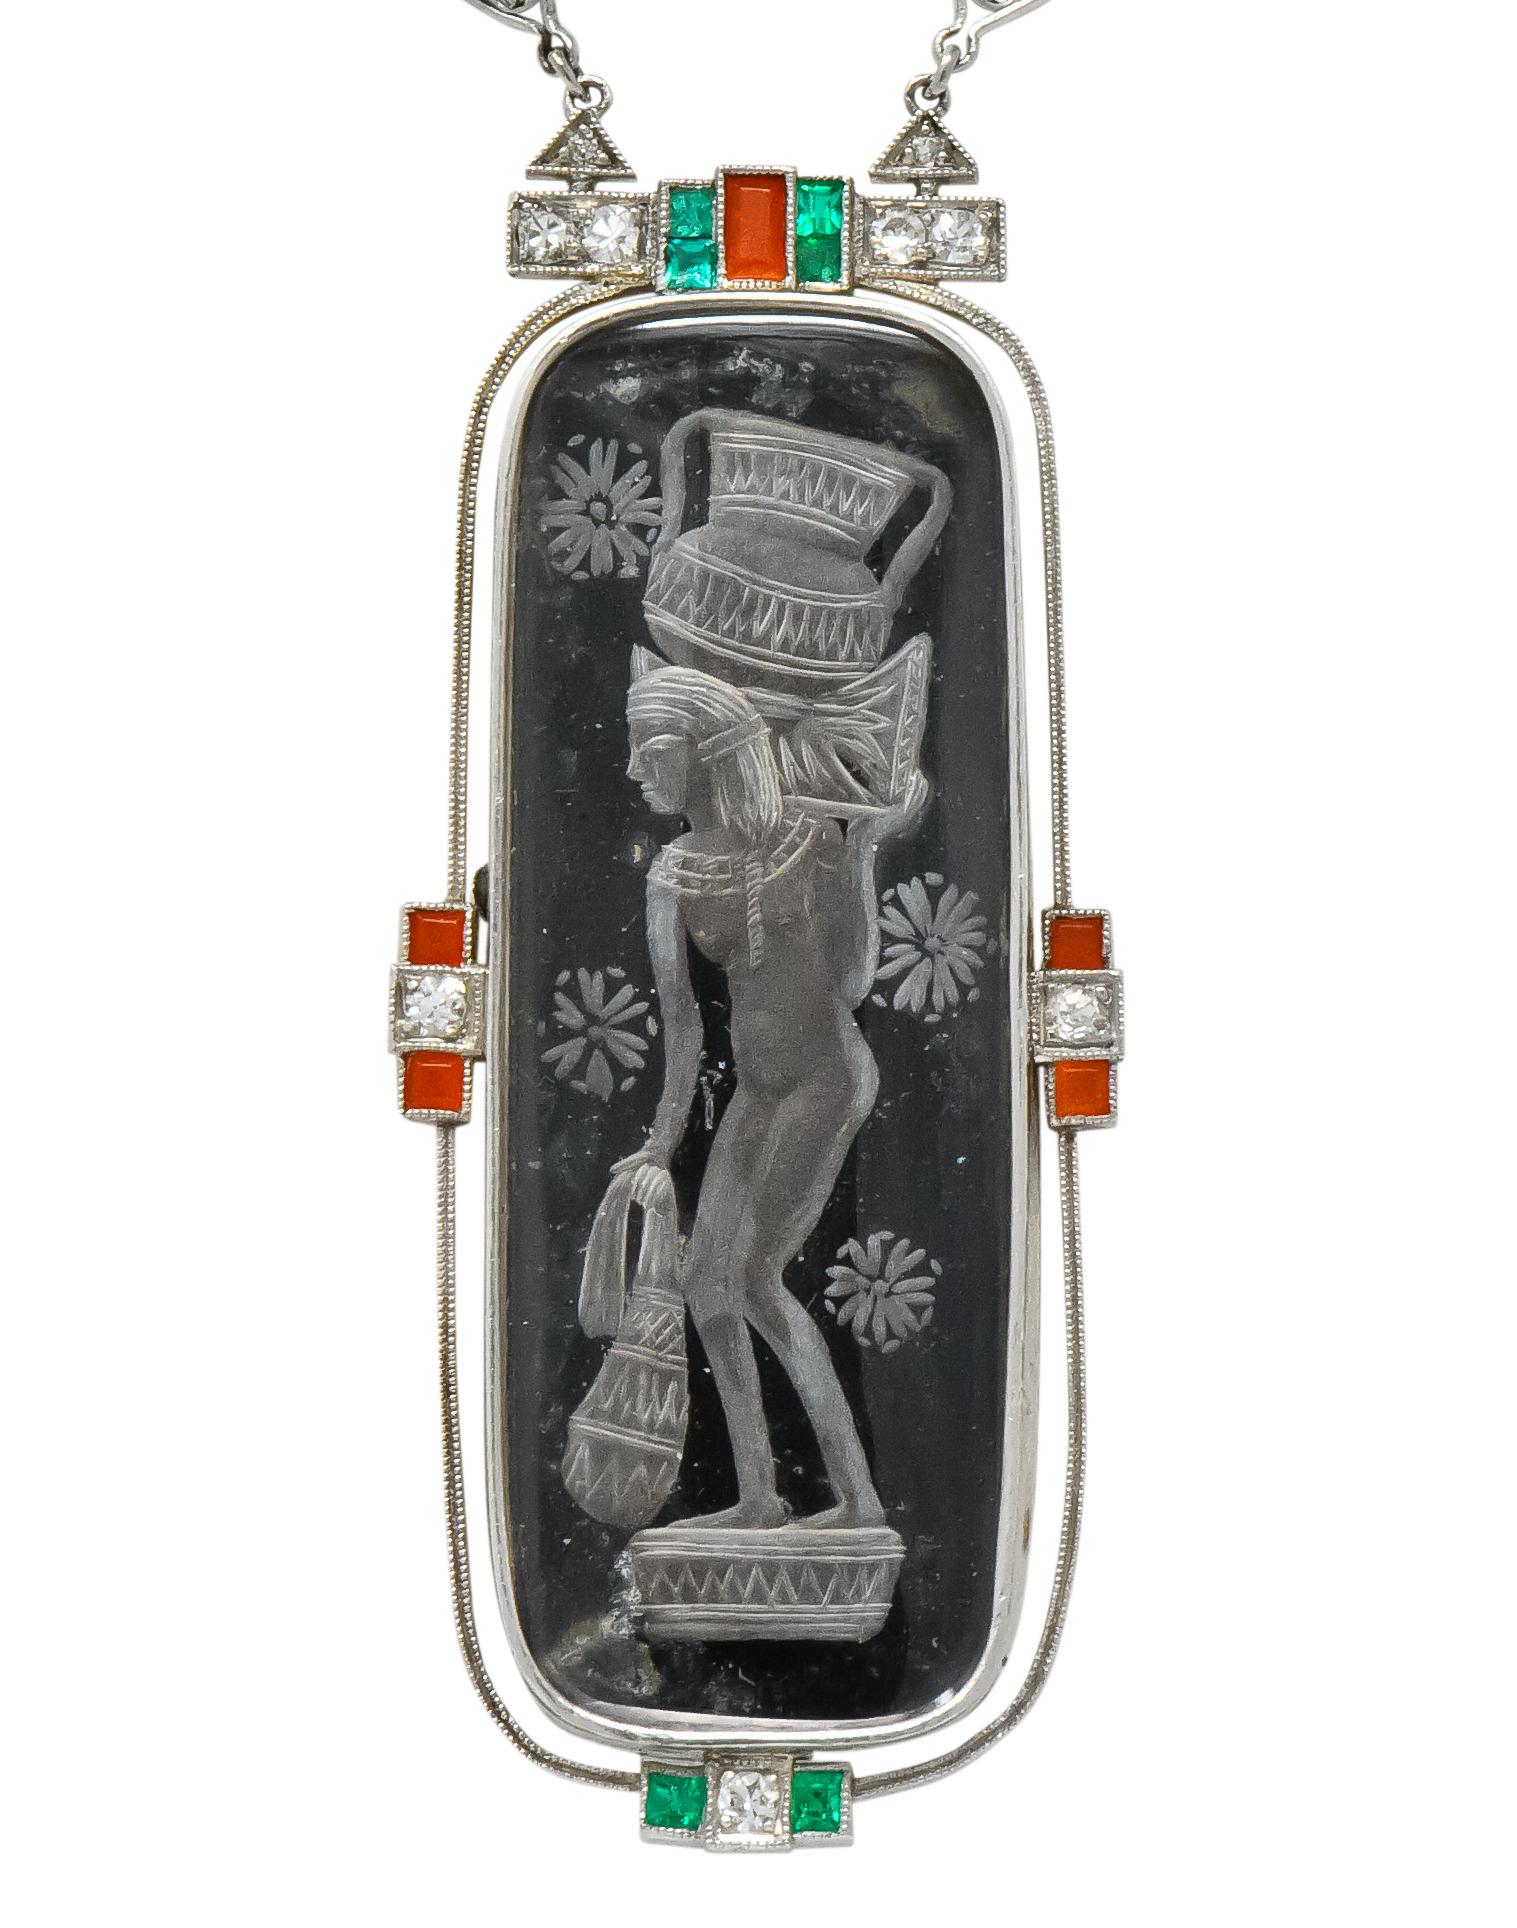 Art Deco platinum necklace featuring a fine Egyptian revival pendant

Pendant composed of a  reverse carved crystal, accented by diamonds, emeralds & coral

Chain set with eye clean and white old European cut diamonds

Unique clasp decorated with